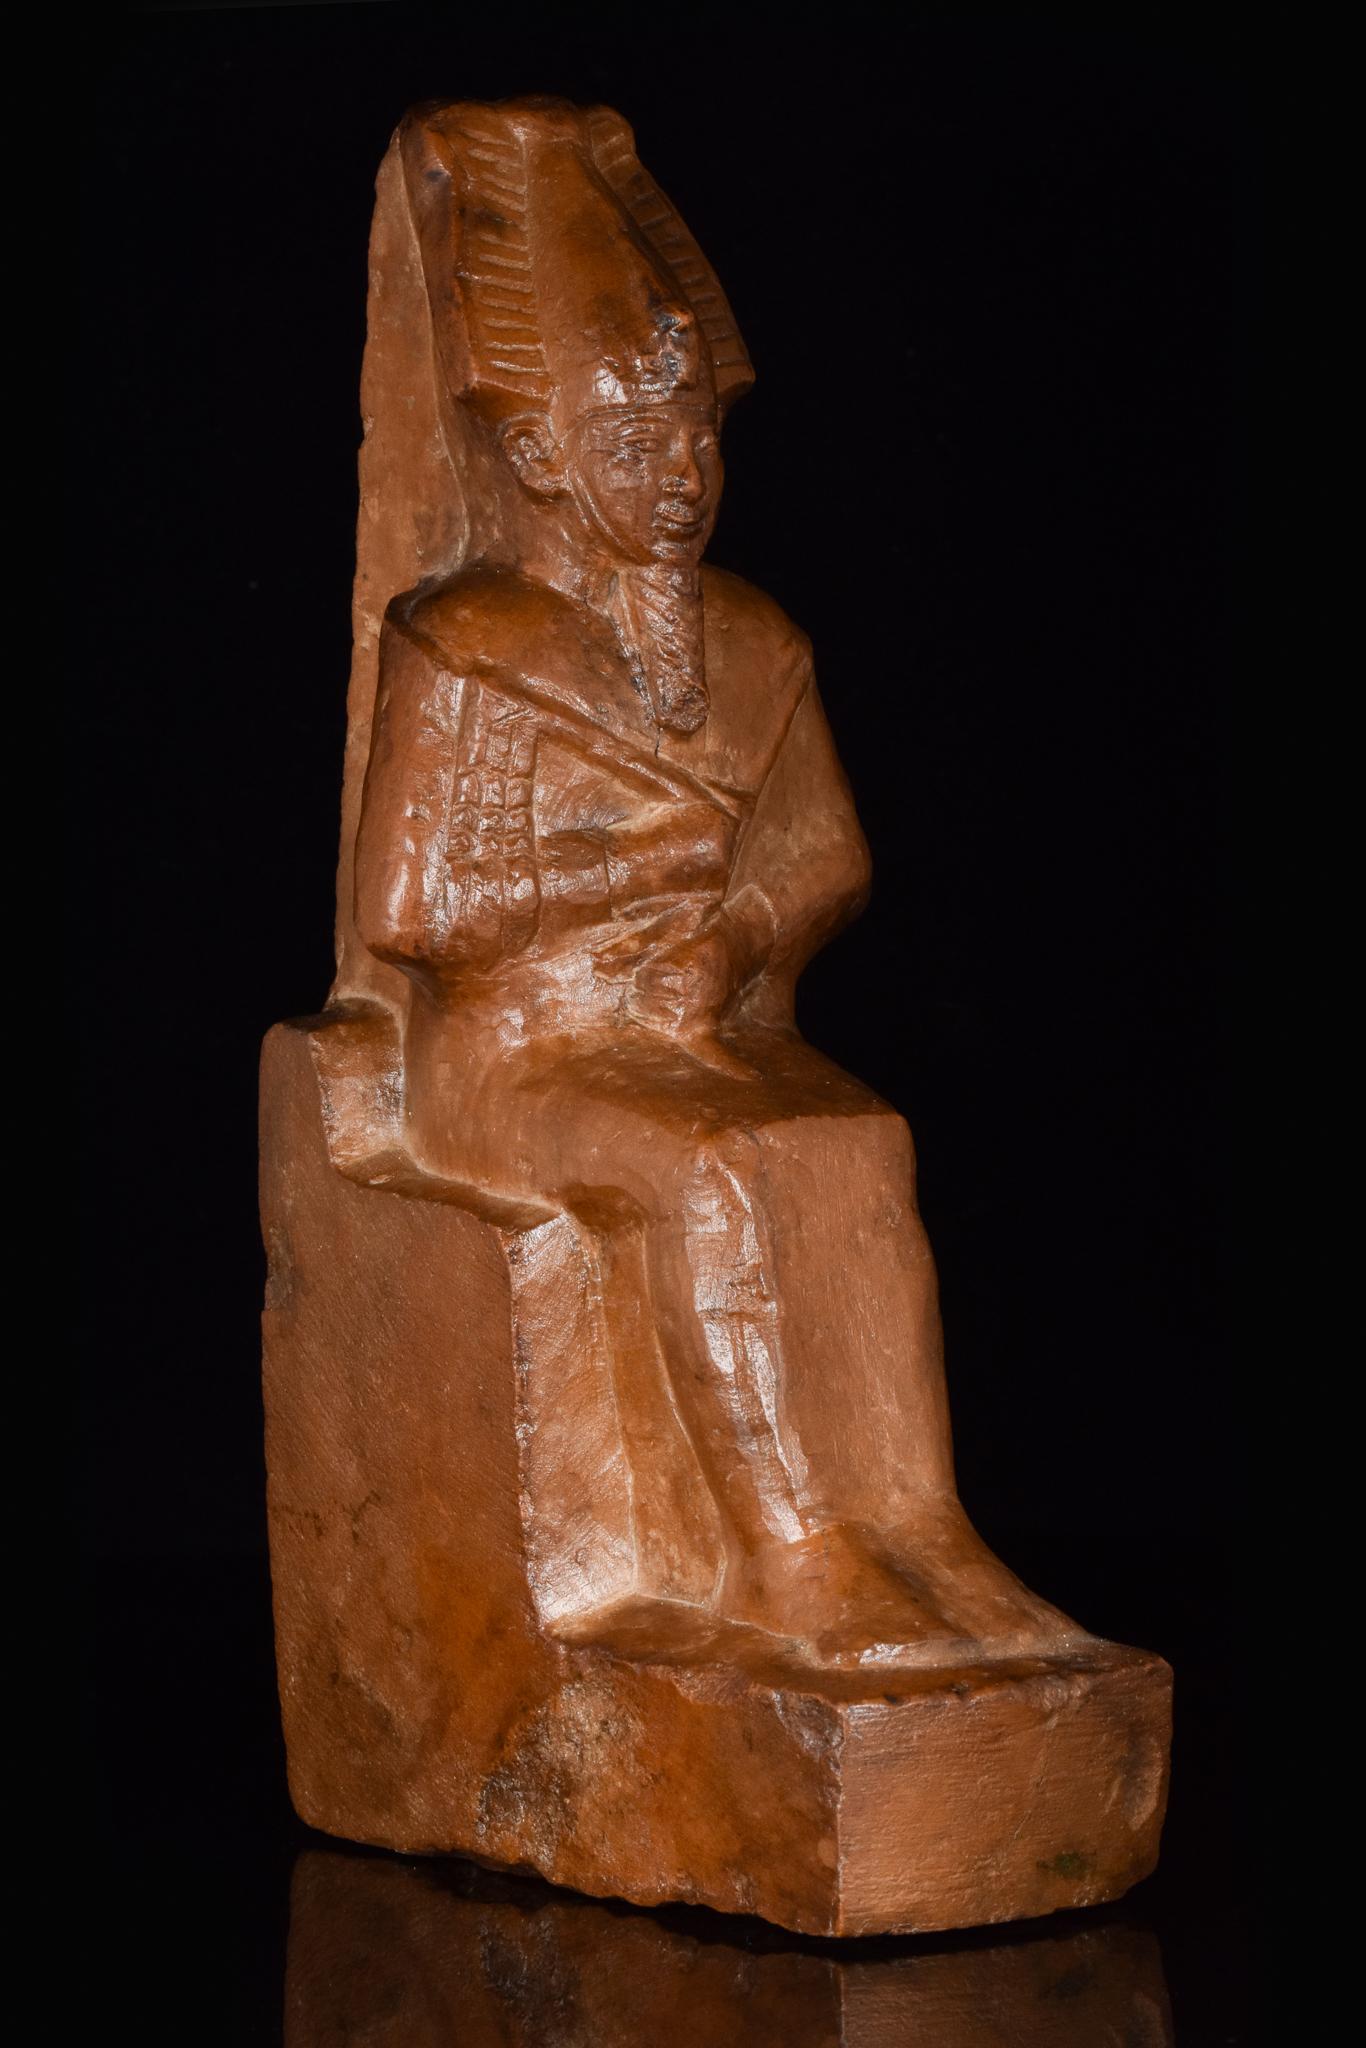 Carved Ancient Egyptian Stone Figure of the God Osiris